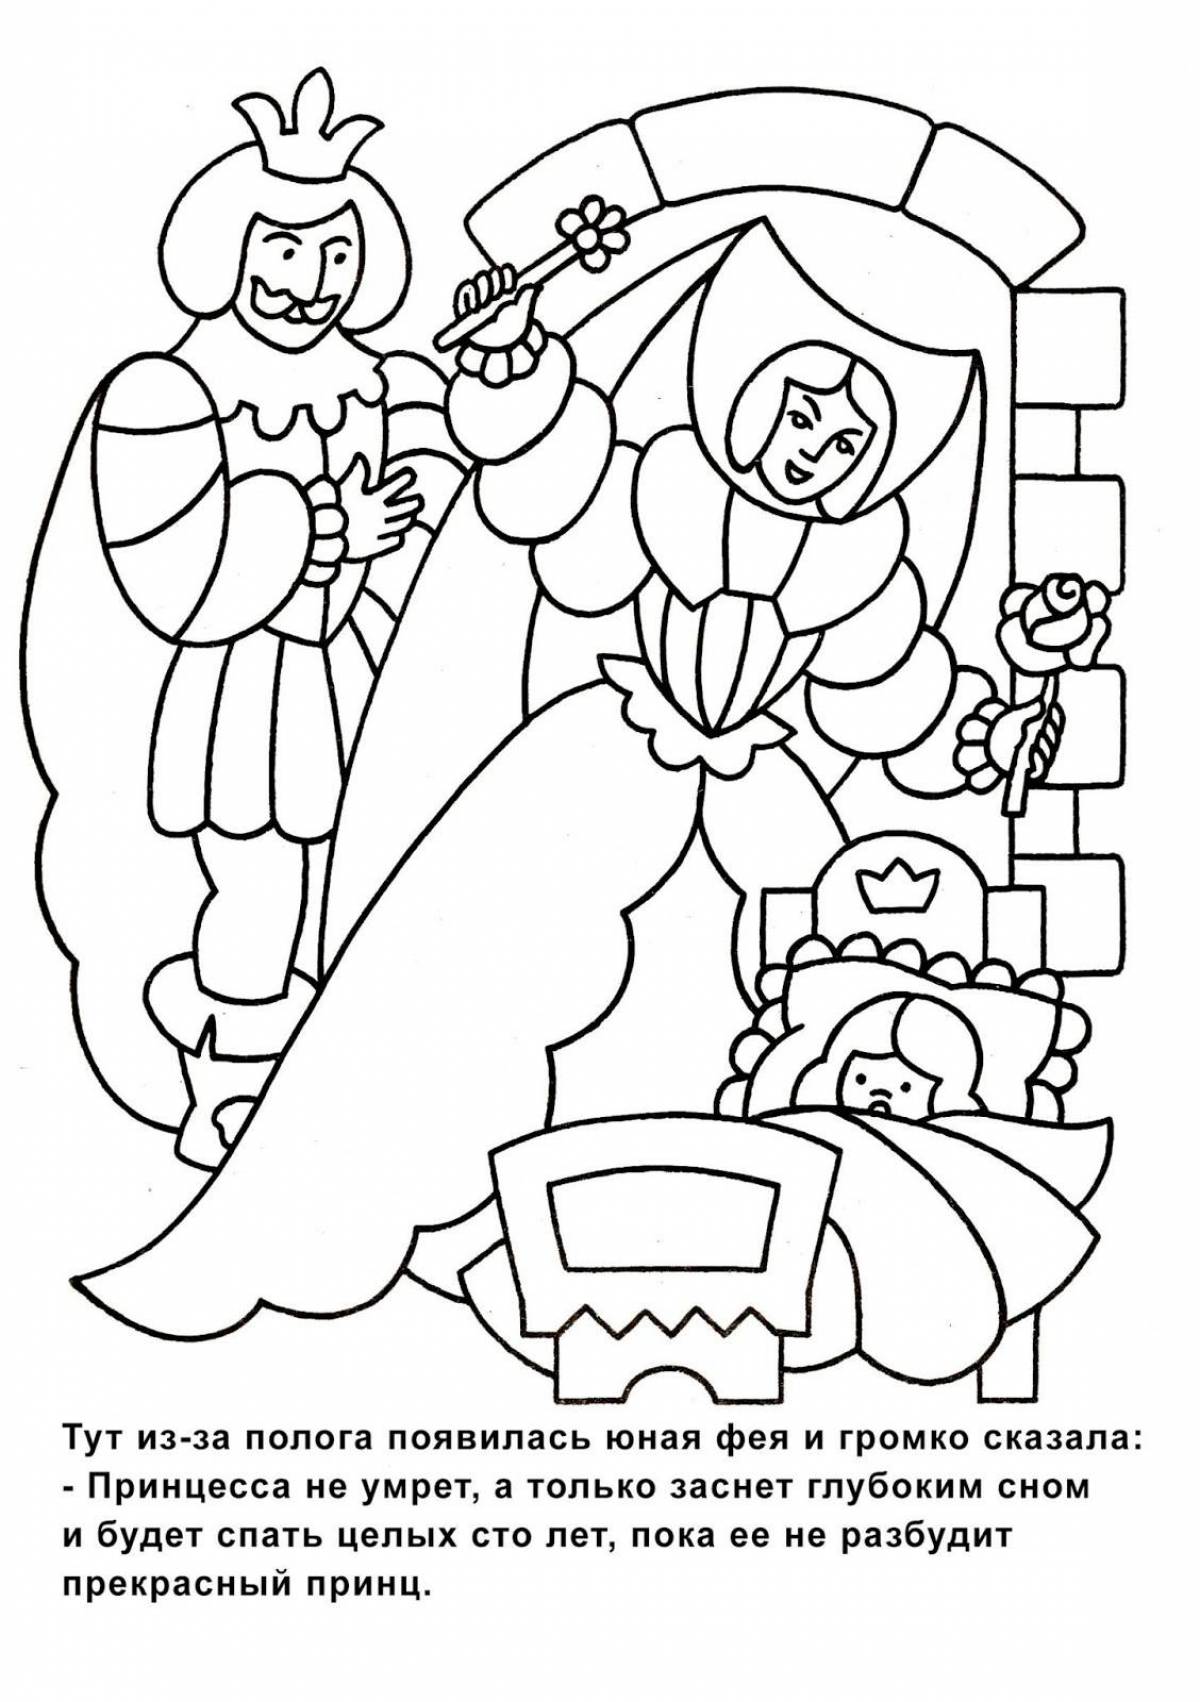 Coloring pages with Charles Perrault's fairy tales